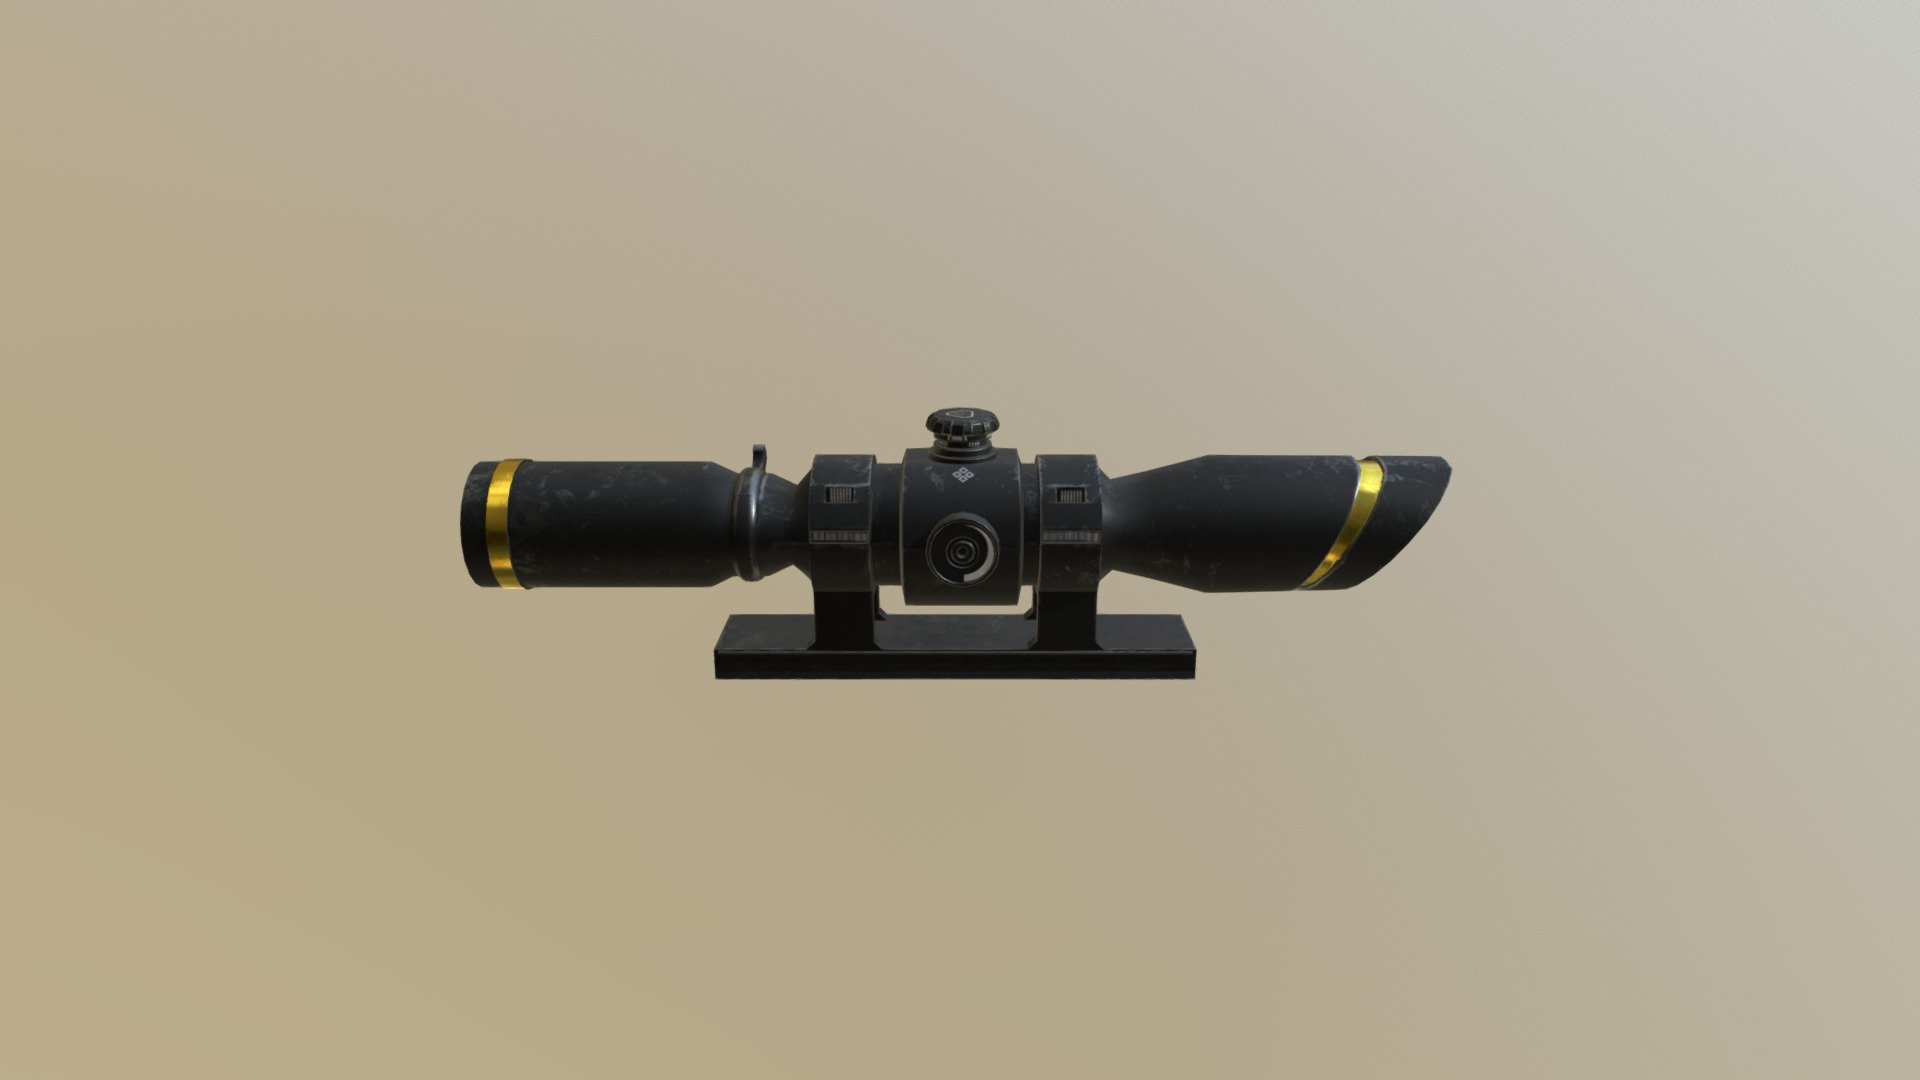 This is just a small part of a large project, the scope will go ontop of a sniper that I will be making for my Hitman scene 3d model